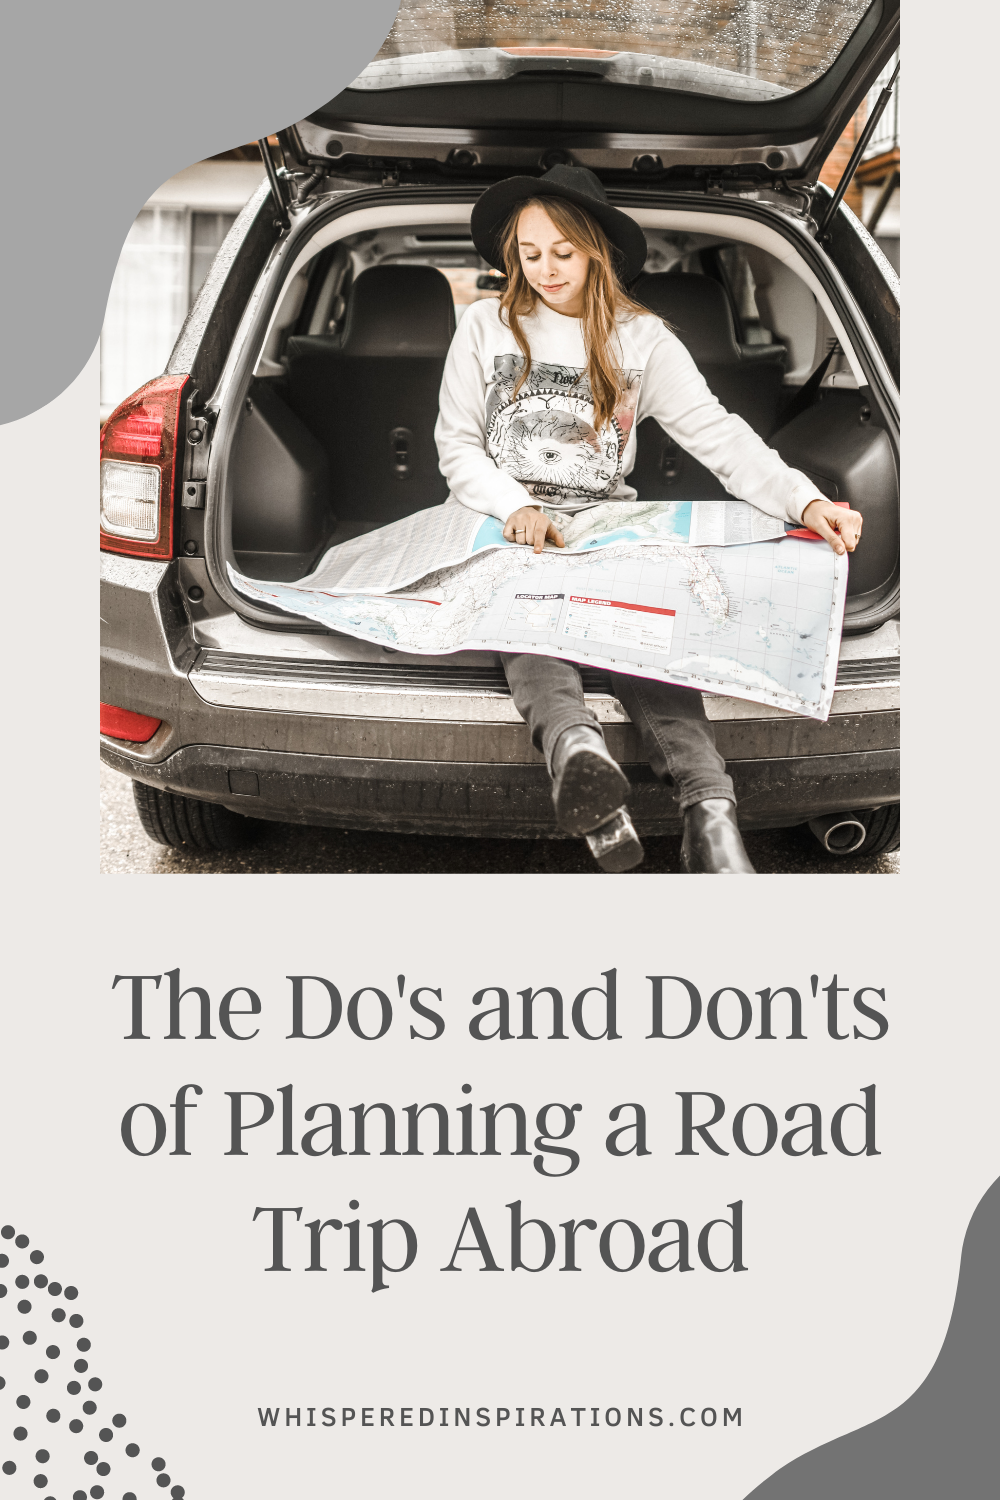 The Do’s and Don’ts of Planning a Road Trip Abroad